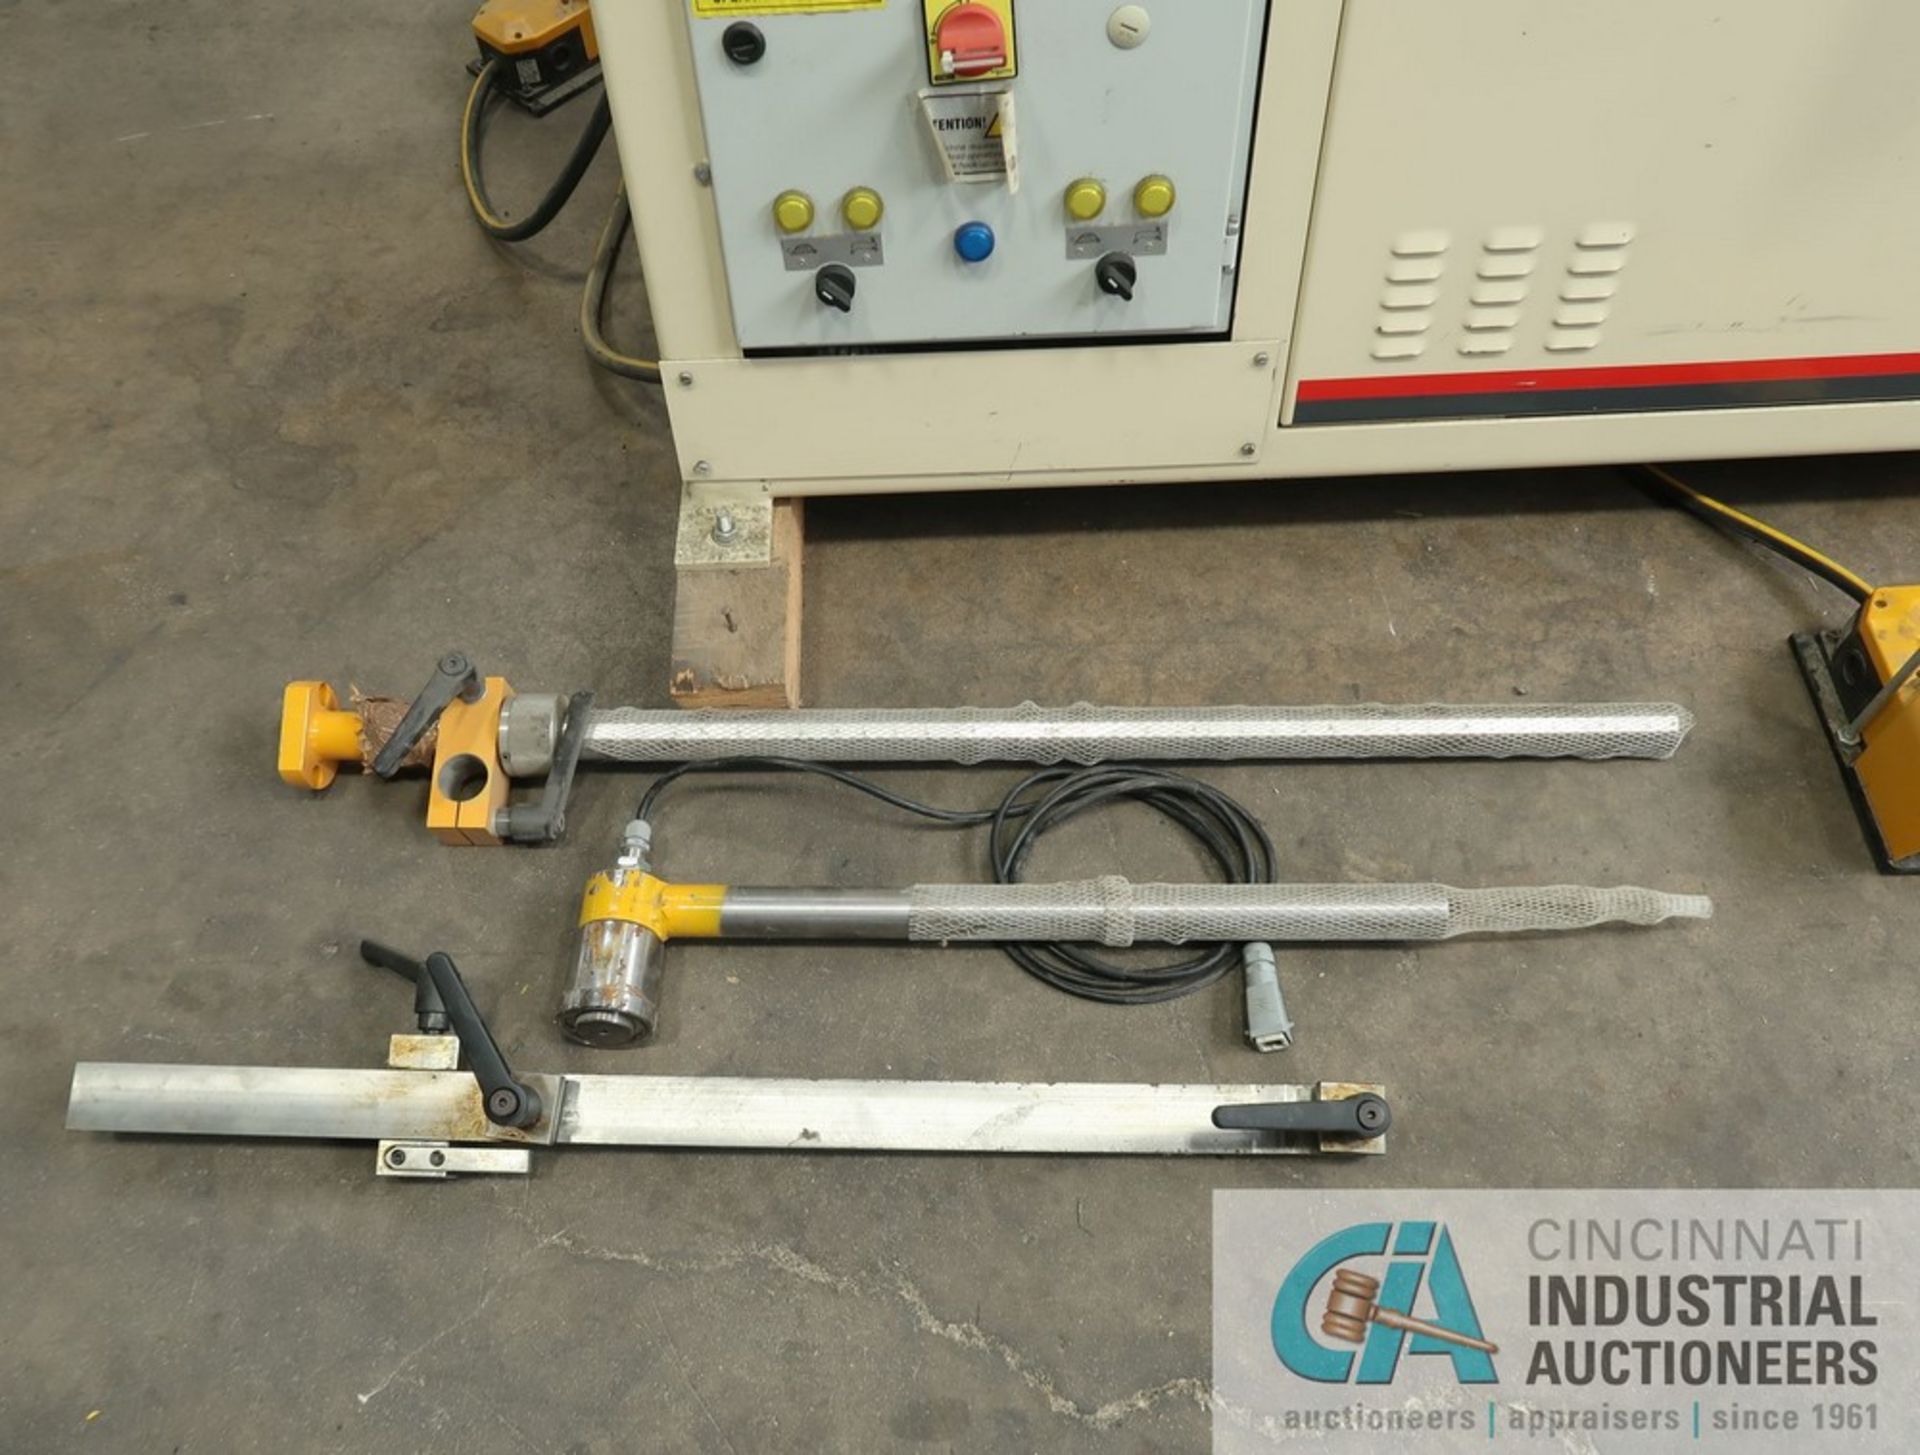 2017 GEKA MODEL BENDICROP 60SD HYDRAULIC IRONWORKER - New never put in service; S/N 168718 (NEW - Image 12 of 16